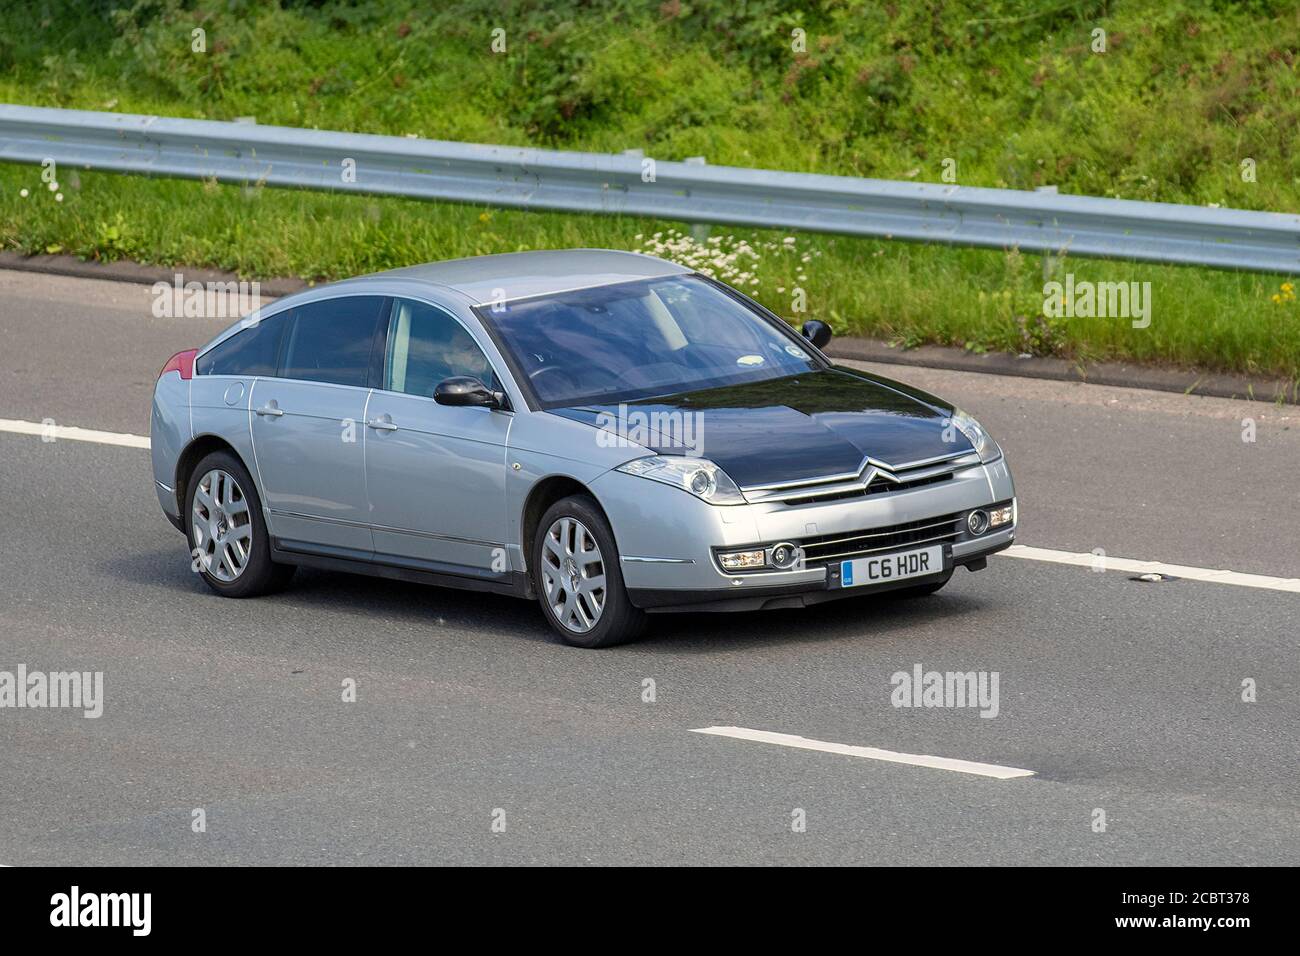 2006 silver black French Citroën C6 Exclusive 4dr Auto; Vehicular traffic moving vehicles, cars driving vehicle on UK roads, french motors, motoring on the M6 motorway highway network. Stock Photo